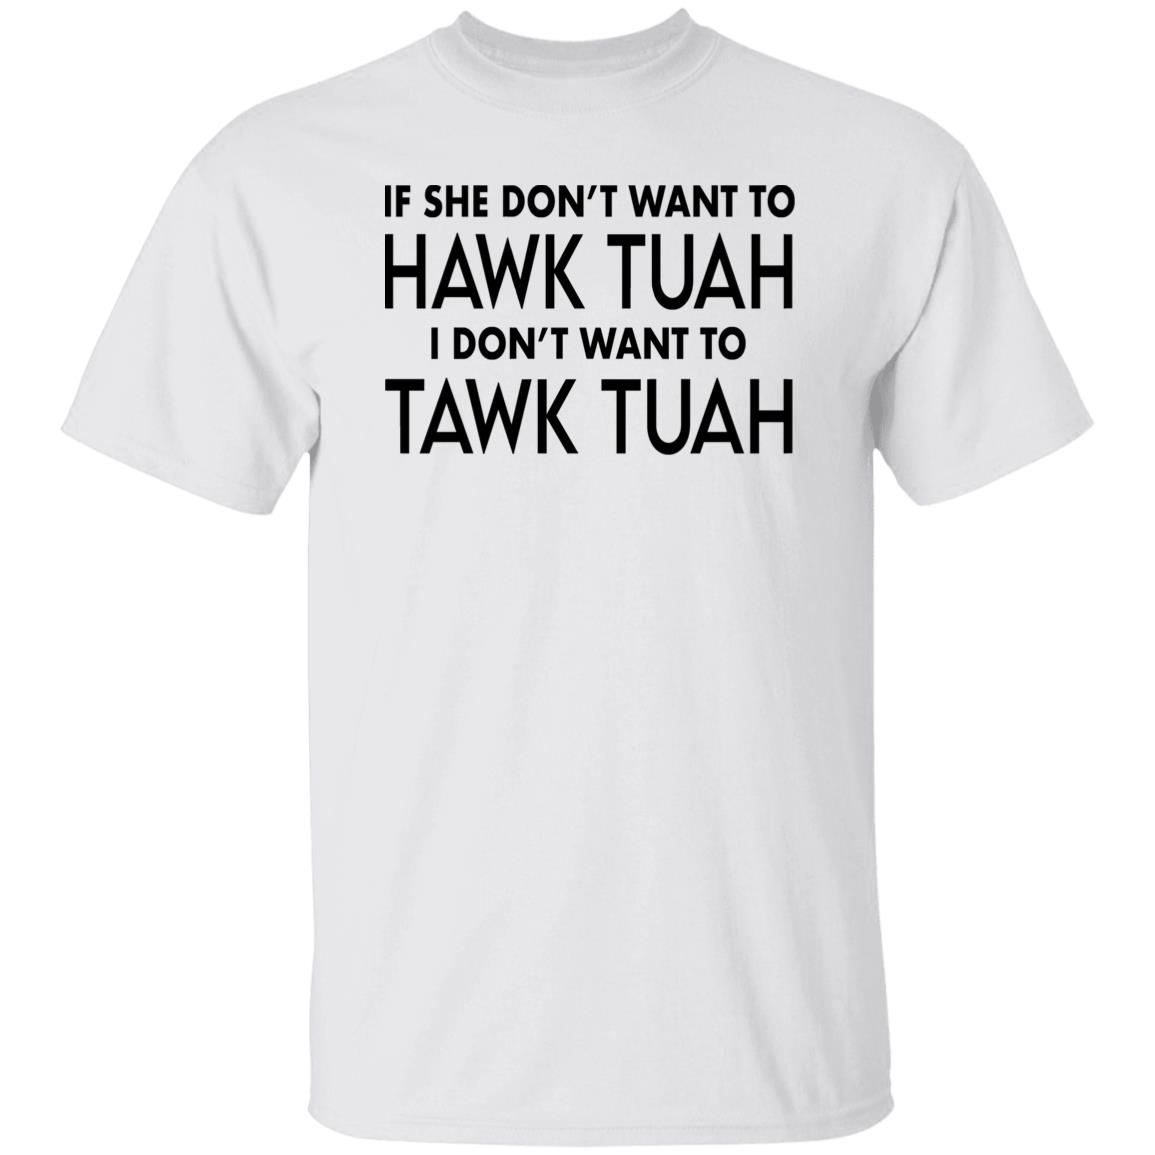 If She Don't Want To Hawk Tuah Then I Don't Want To Tawk Tuah Shirt